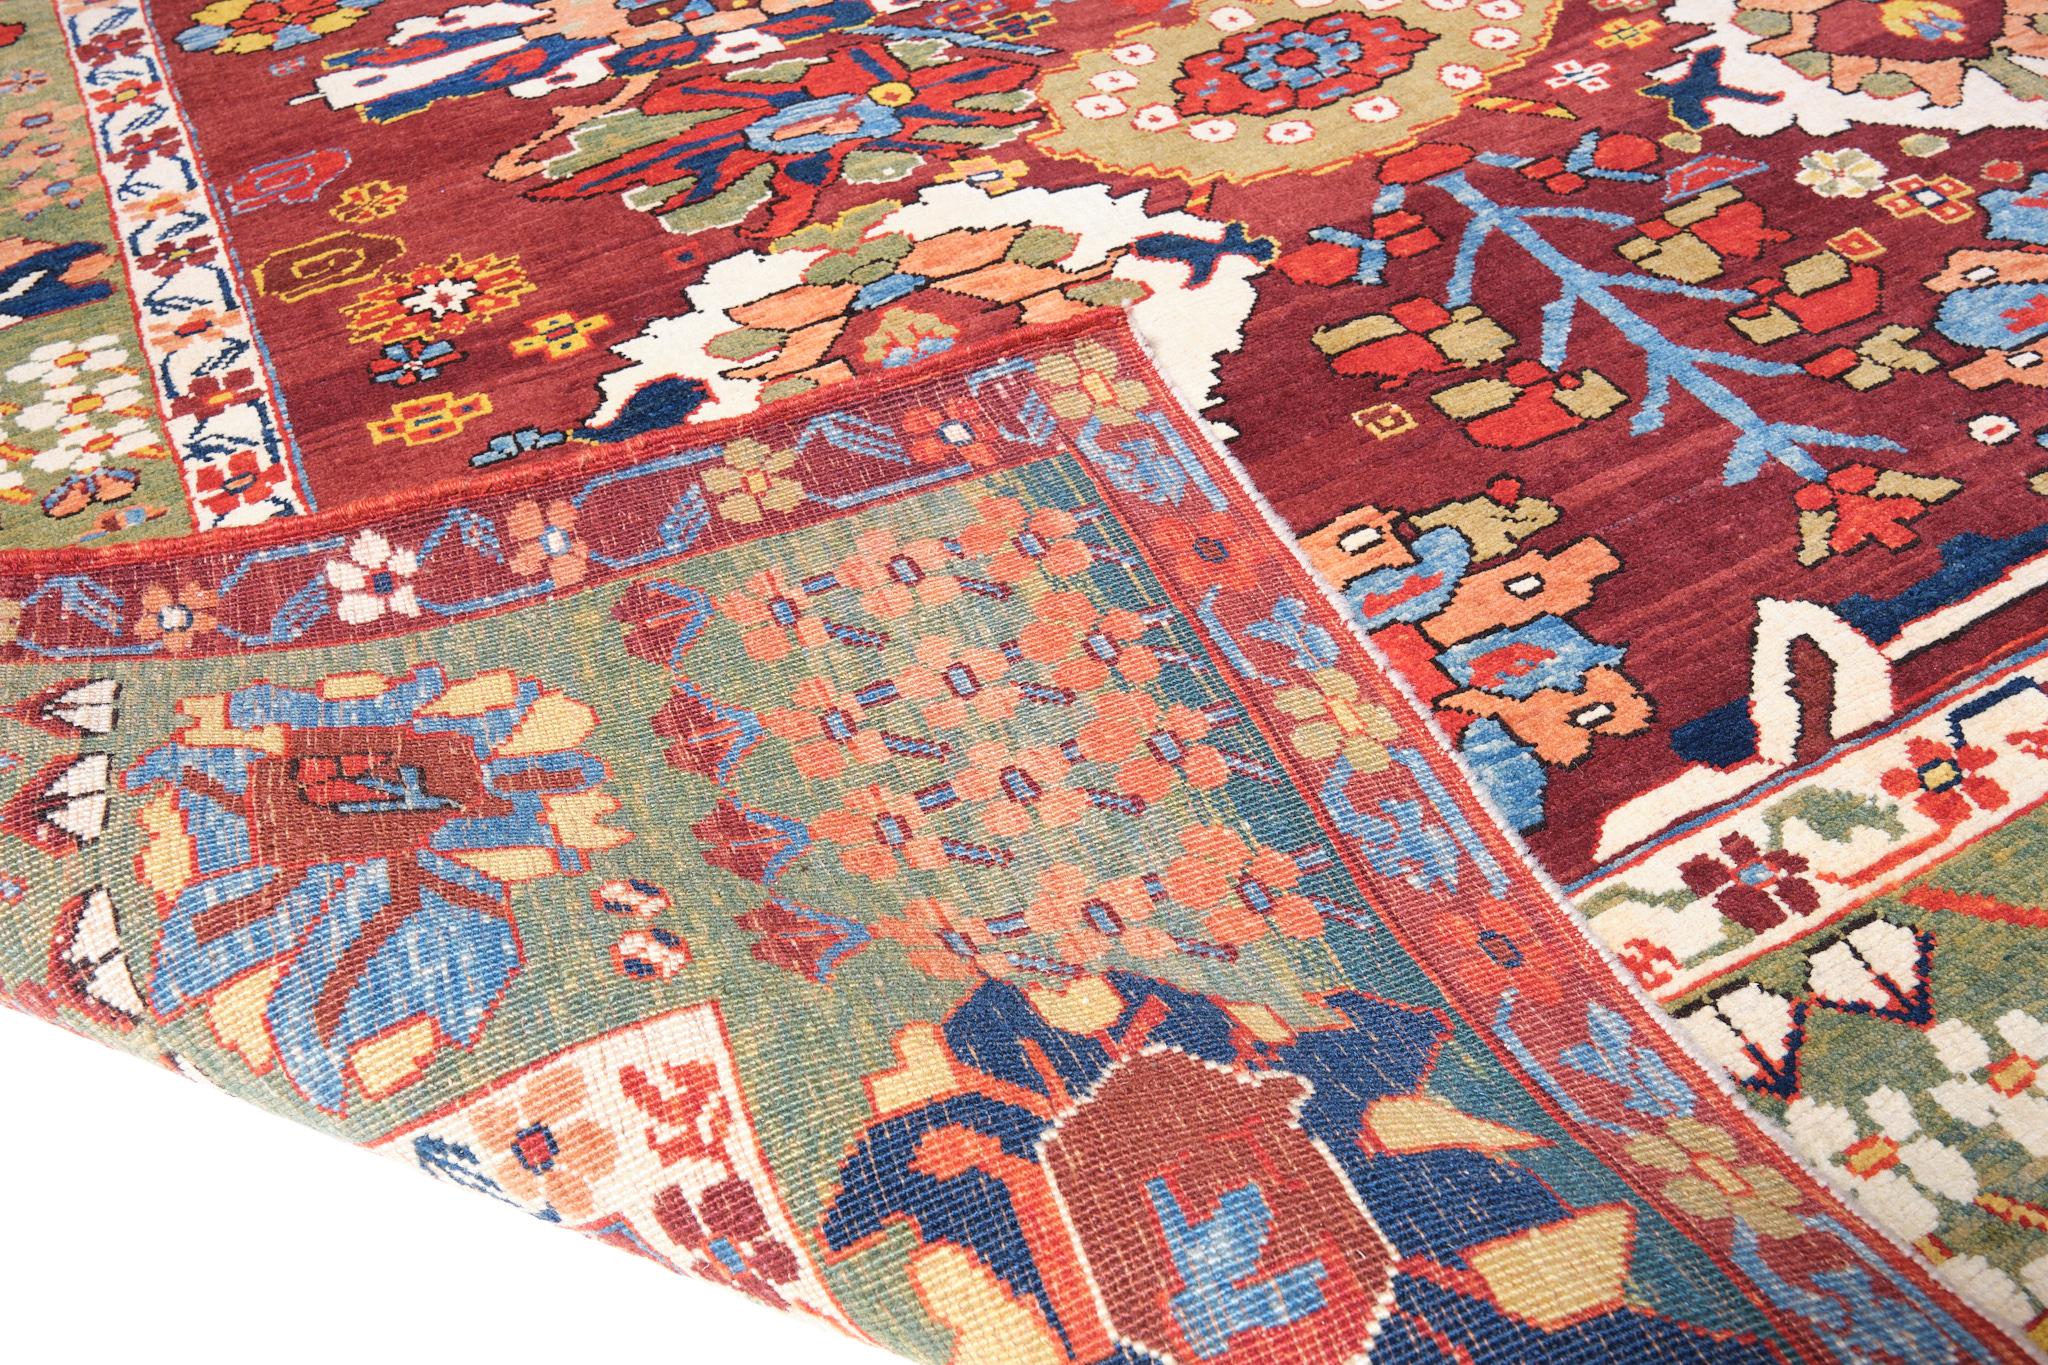 Vegetable Dyed Ararat Rugs Trees and Palmettes Rug Saluj Bulagh Revival Carpet Natural Dyed For Sale